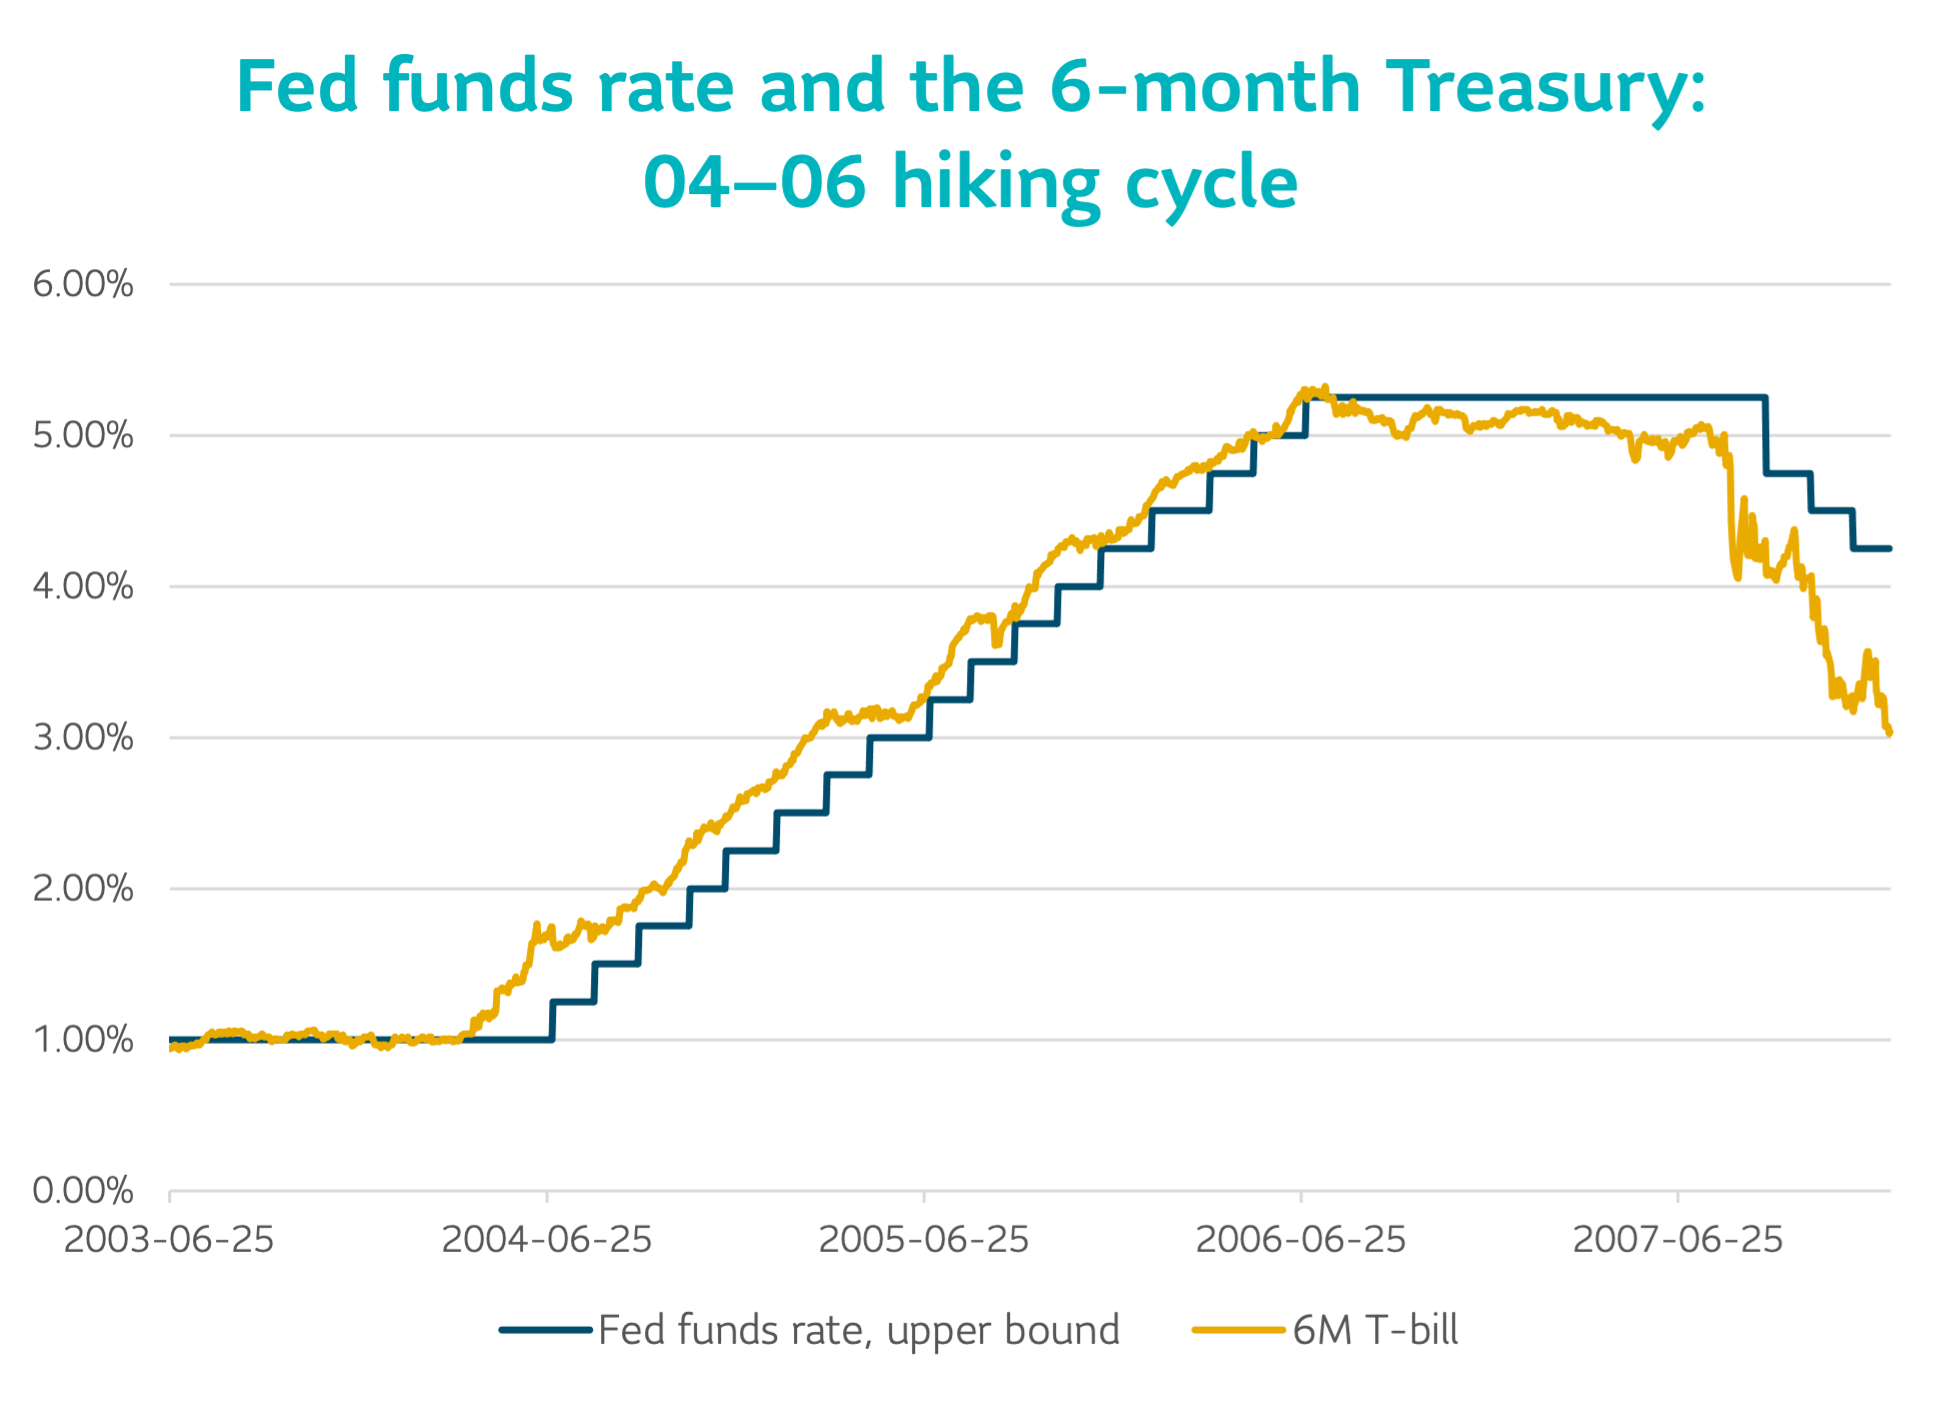 Fed funds rate and the 6-month Treasury: 04-06 hiking cycle